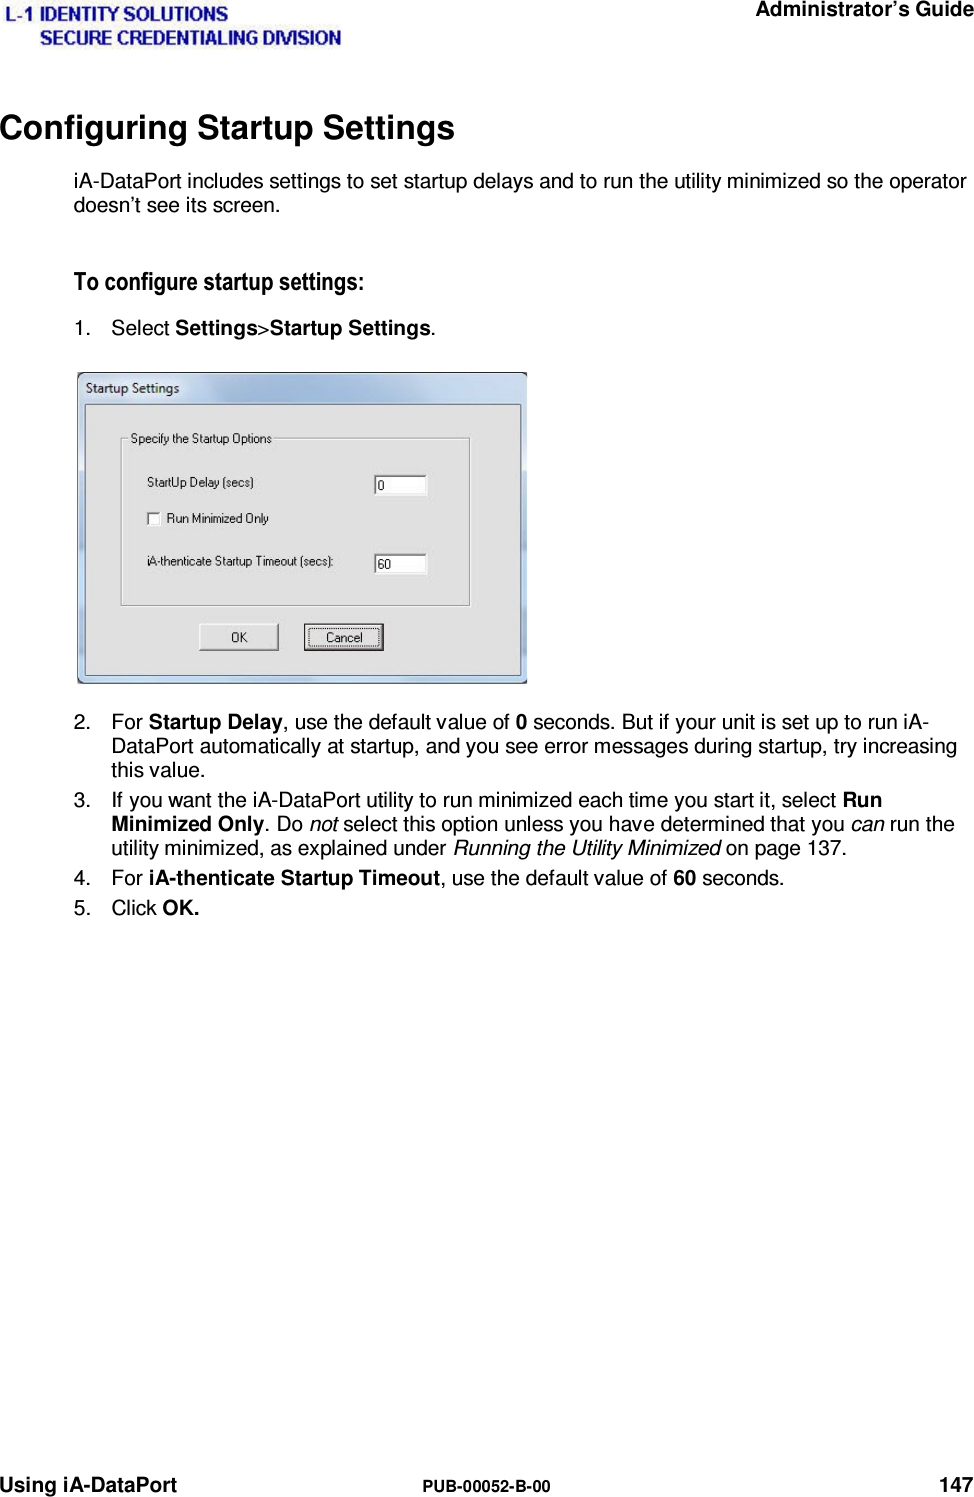   Administrator’s Guide Using iA-DataPort  PUB-00052-B-00 147 Configuring Startup Settings iA-DataPort includes settings to set startup delays and to run the utility minimized so the operator doesn’t see its screen. 7RFRQILJXUHVWDUWXSVHWWLQJV1. Select Settings&gt;Startup Settings. 2. For Startup Delay, use the default value of 0 seconds. But if your unit is set up to run iA-DataPort automatically at startup, and you see error messages during startup, try increasing this value. 3.  If you want the iA-DataPort utility to run minimized each time you start it, select Run Minimized Only. Do not select this option unless you have determined that you can run the utility minimized, as explained under Running the Utility Minimized on page 137. 4. For iA-thenticate Startup Timeout, use the default value of 60 seconds. 5. Click OK.   